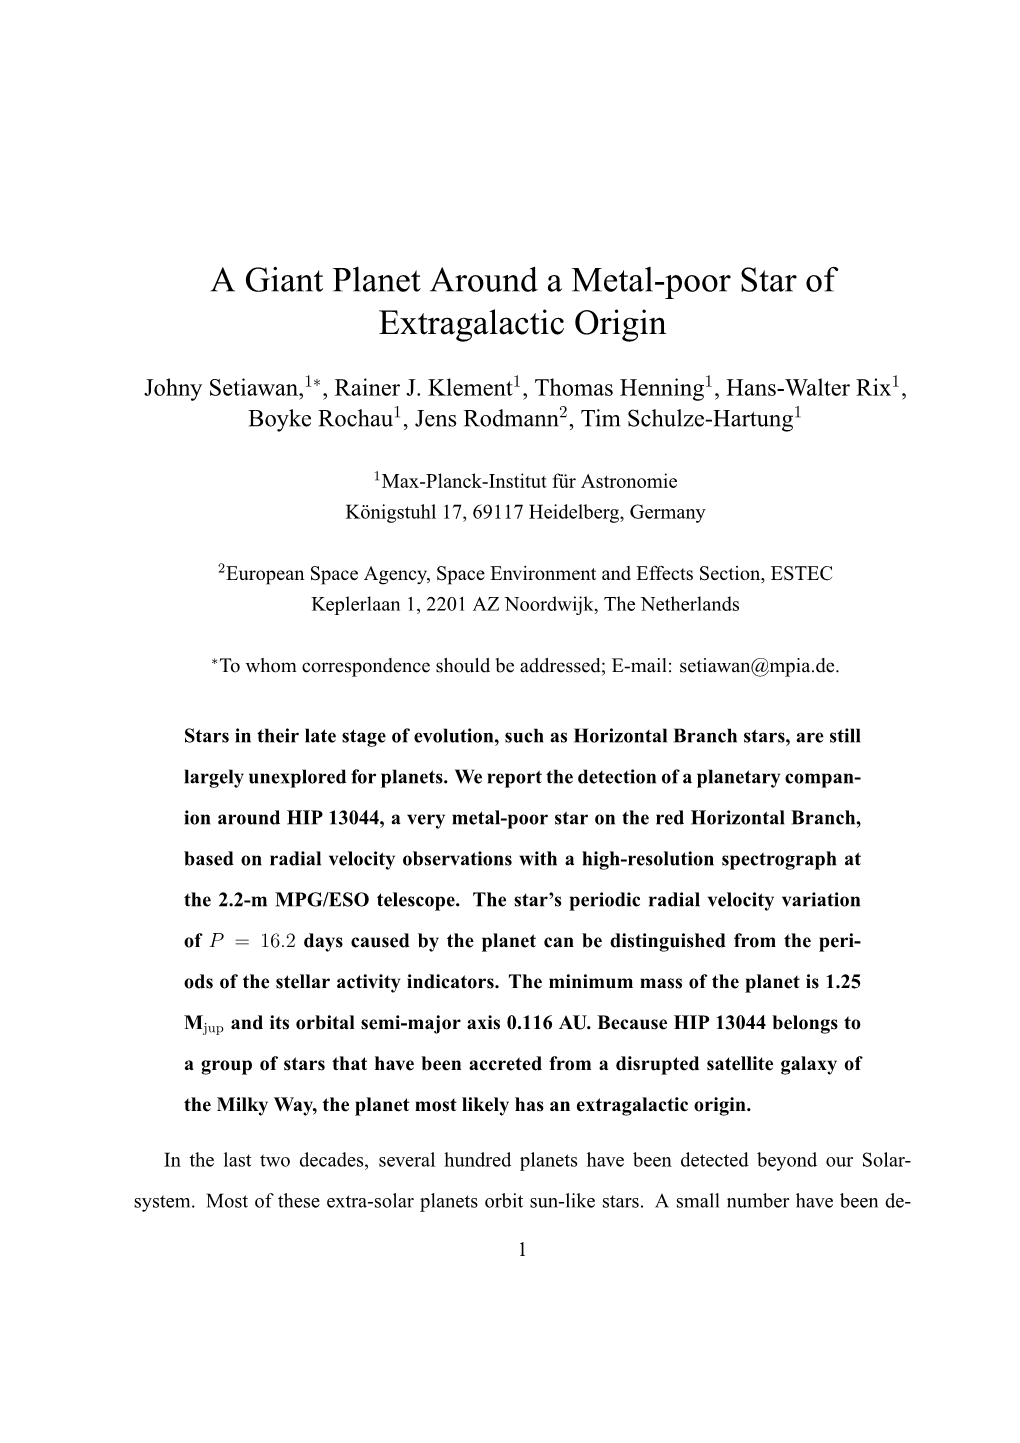 A Giant Planet Around a Metal-Poor Star of Extragalactic Origin